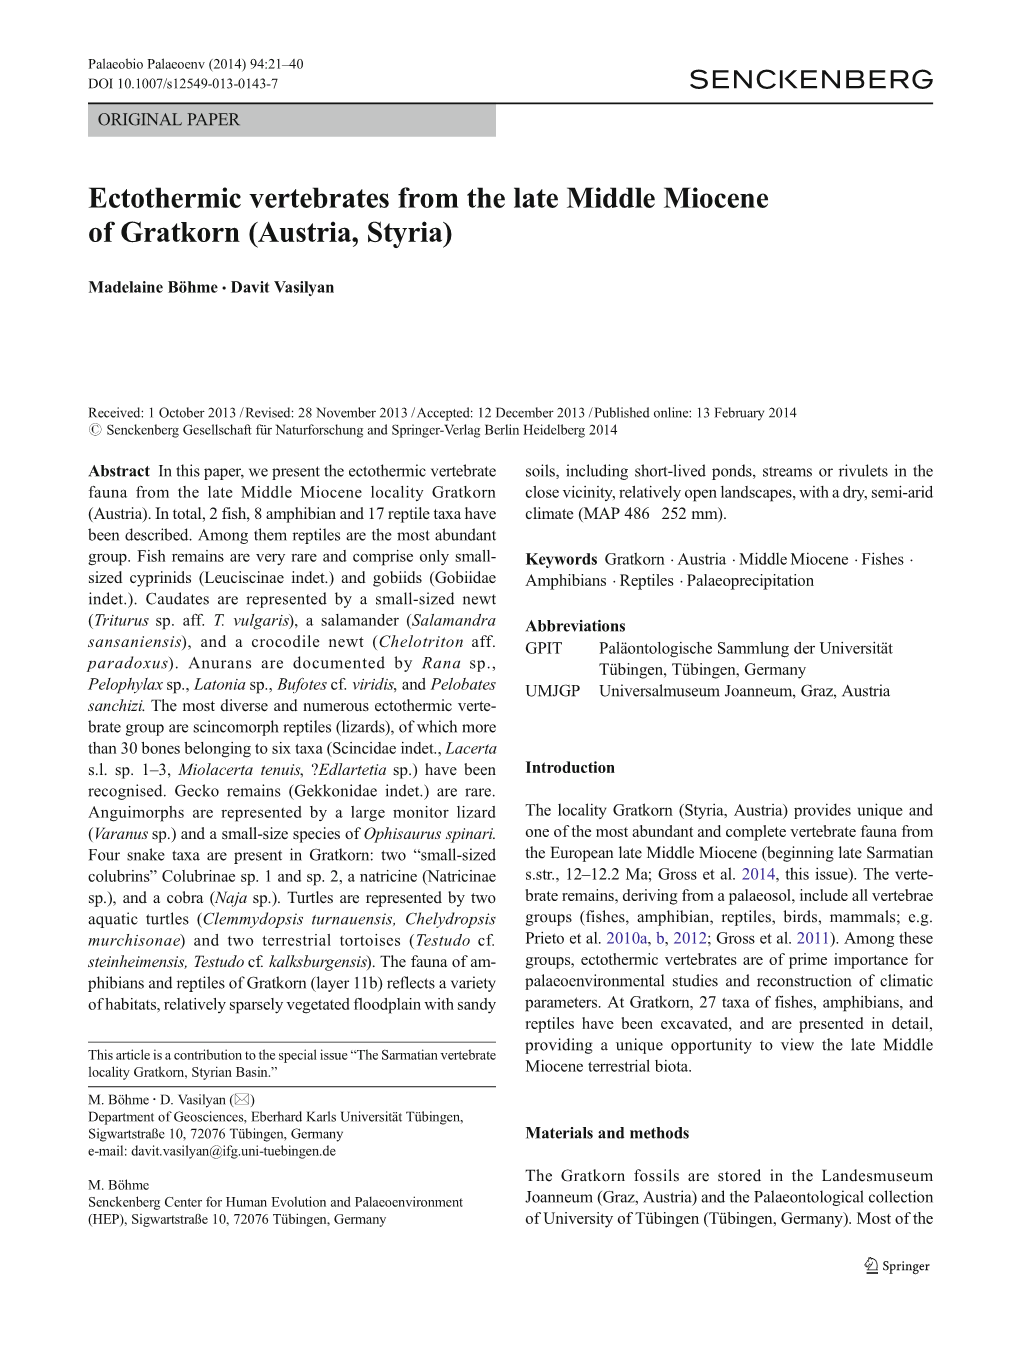 Ectothermic Vertebrates from the Late Middle Miocene of Gratkorn (Austria, Styria)